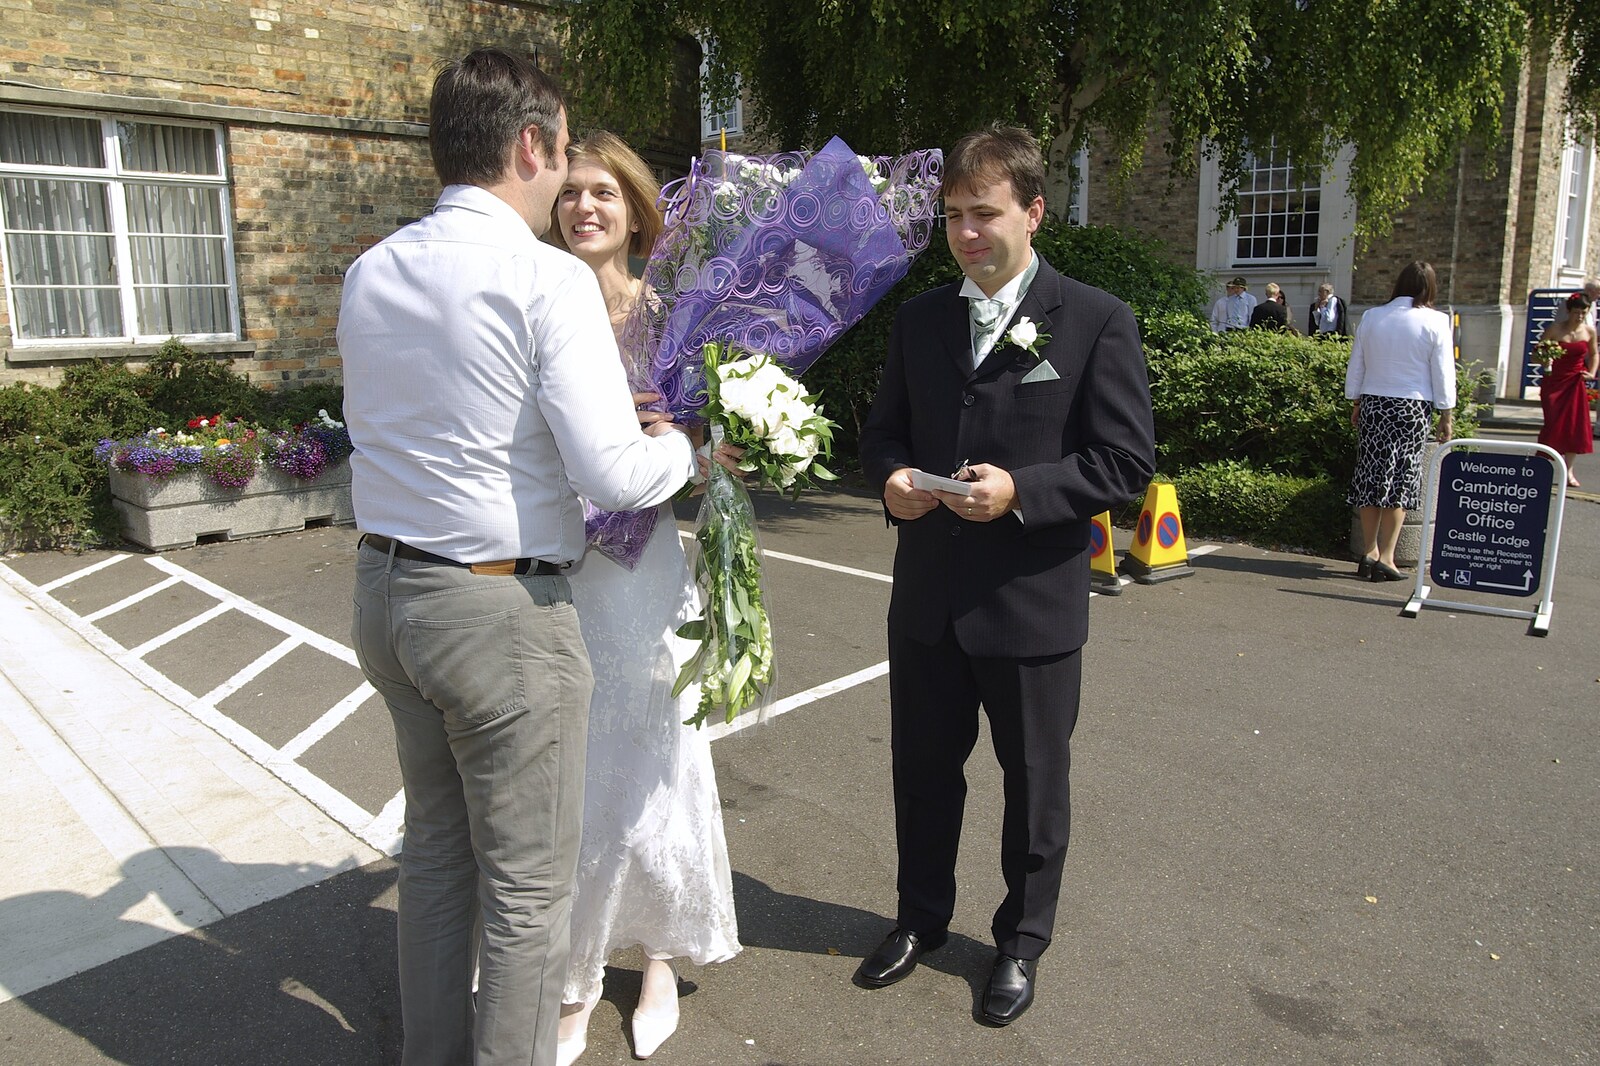 Liviu and Christina's Wedding Day, Babraham, Cambridge - 11th August 2007: The couple greet the guests